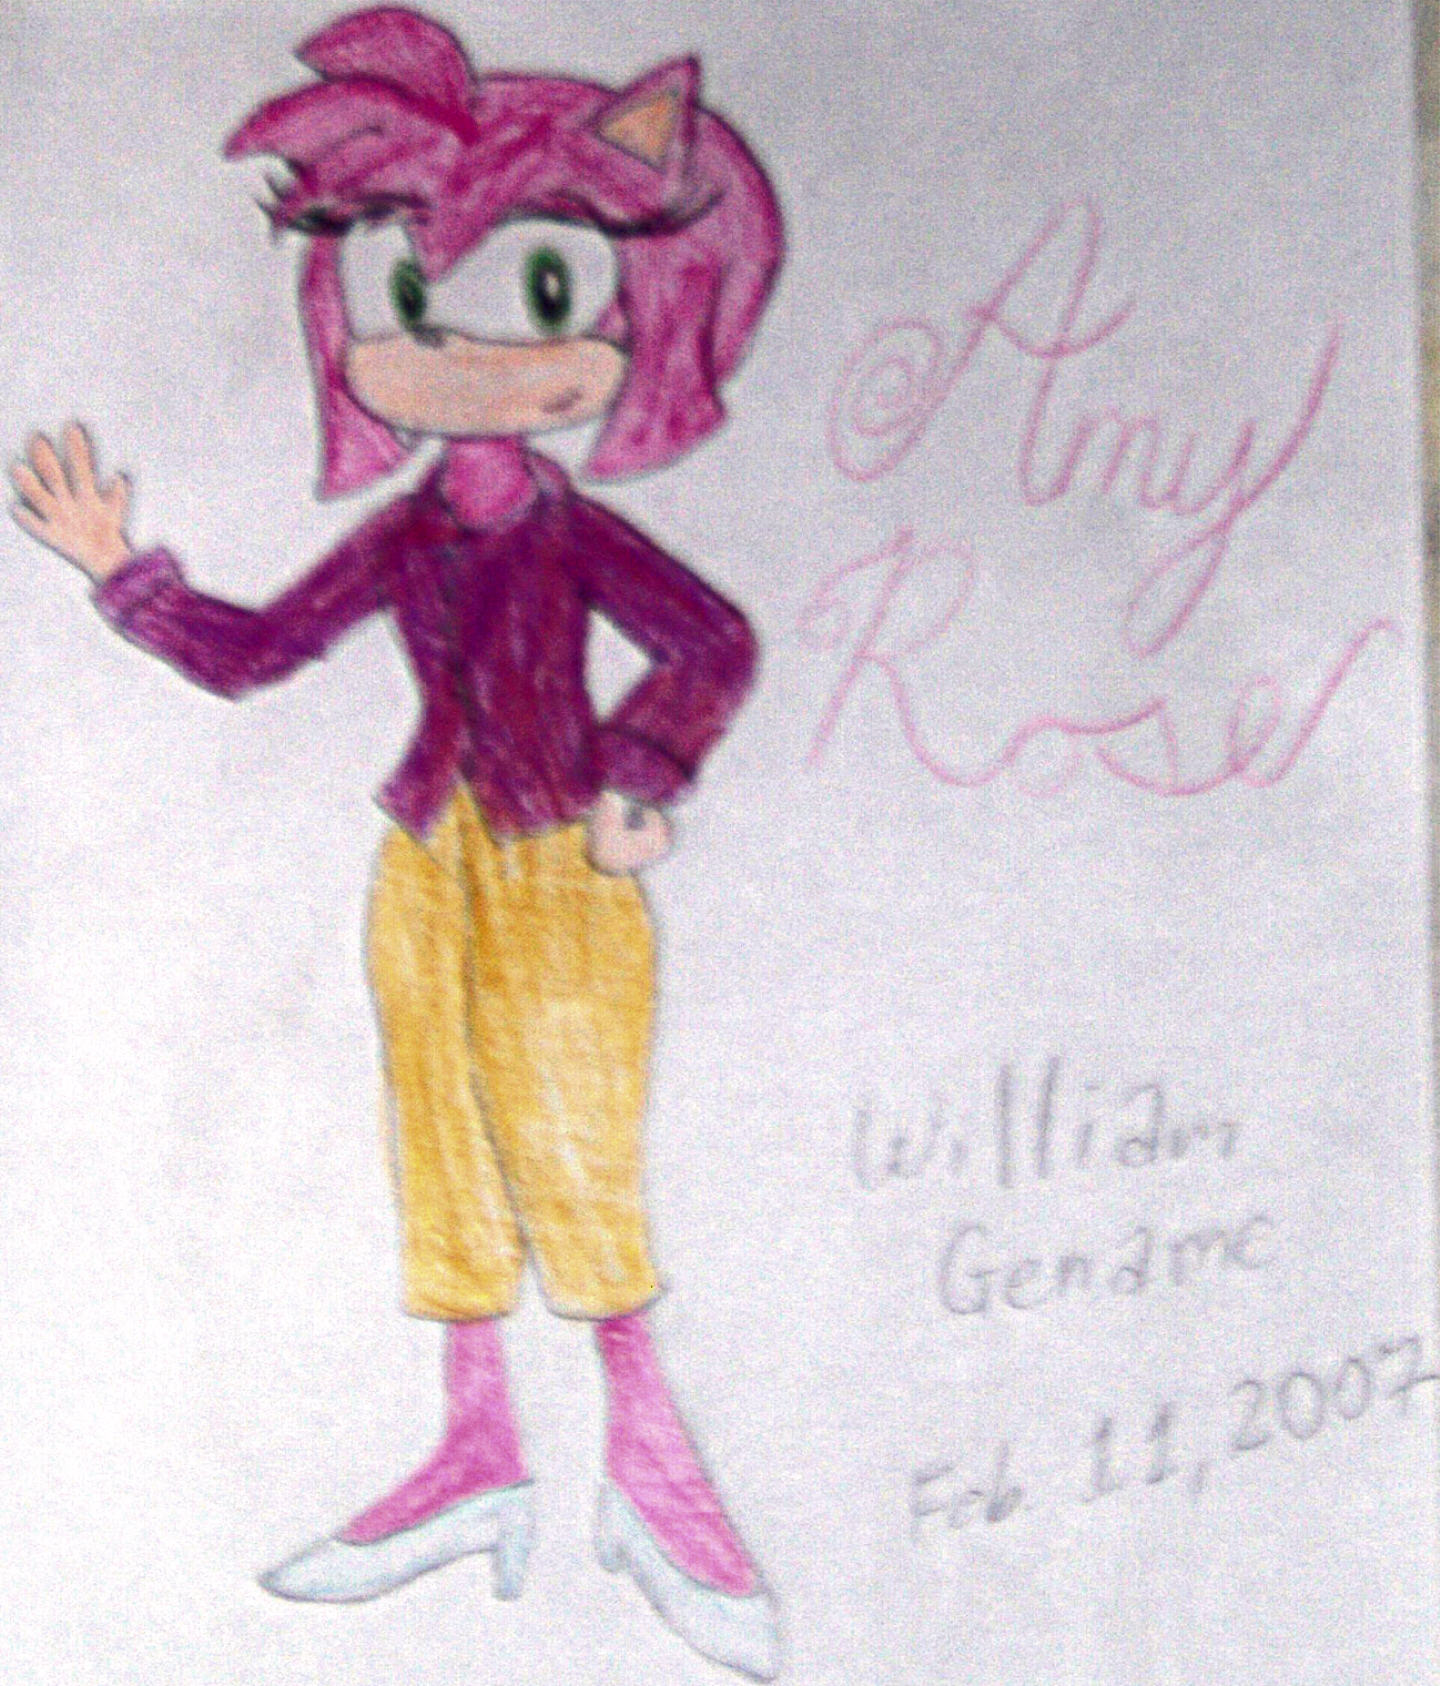 Lindsey's Clothes 4 Amy Rose! by germanname